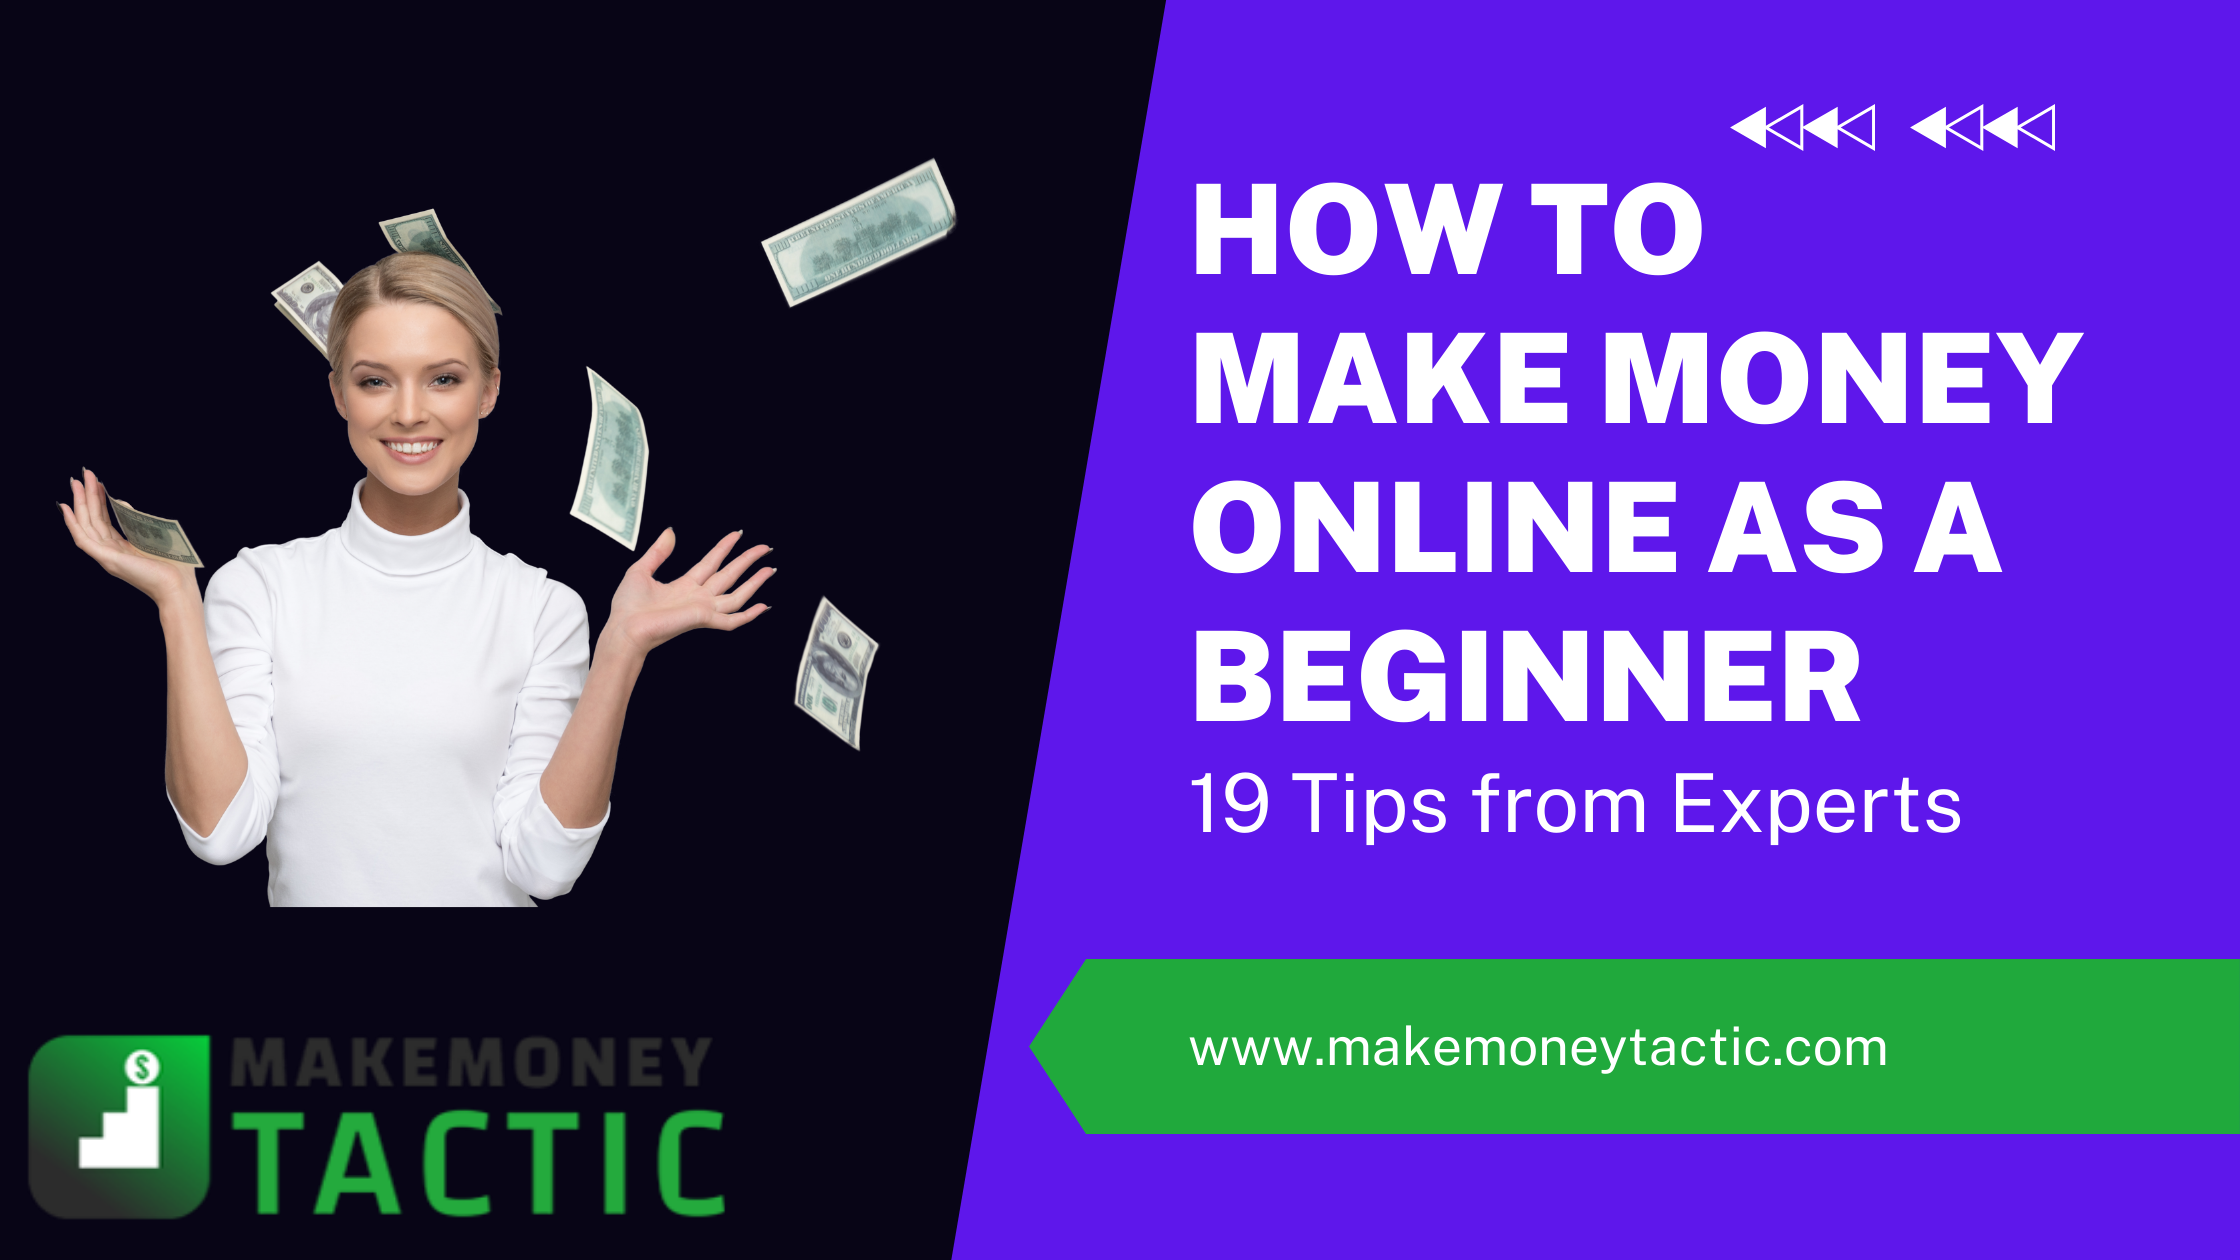 Make Money Online Without Distractions